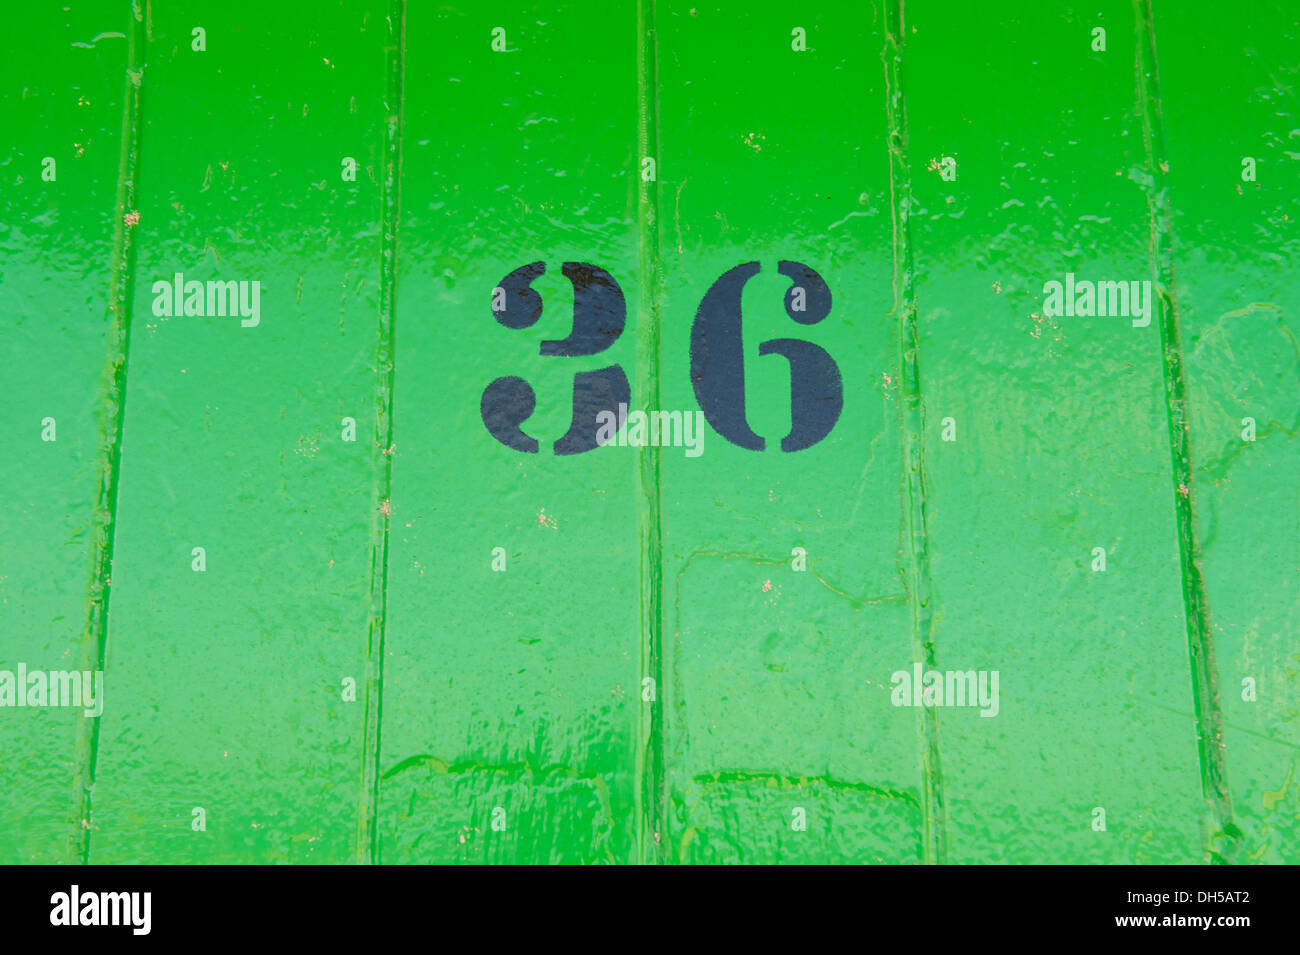 Number 24 Glossy Green Color On Stock Illustration 1629541552